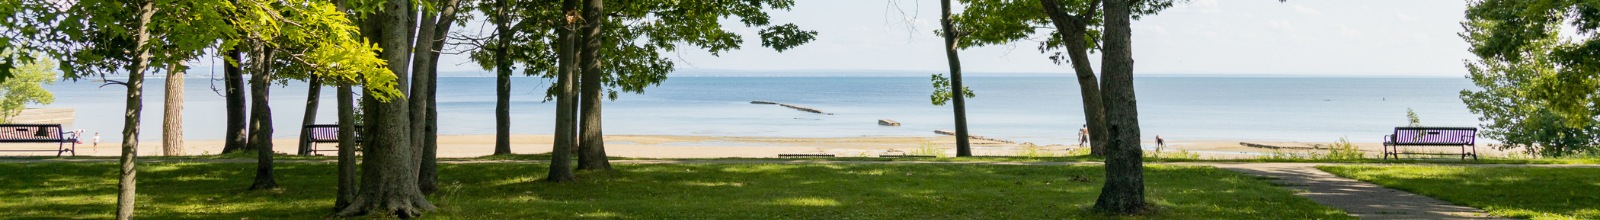 A shoreline along a large lake with a sandy beach and bench